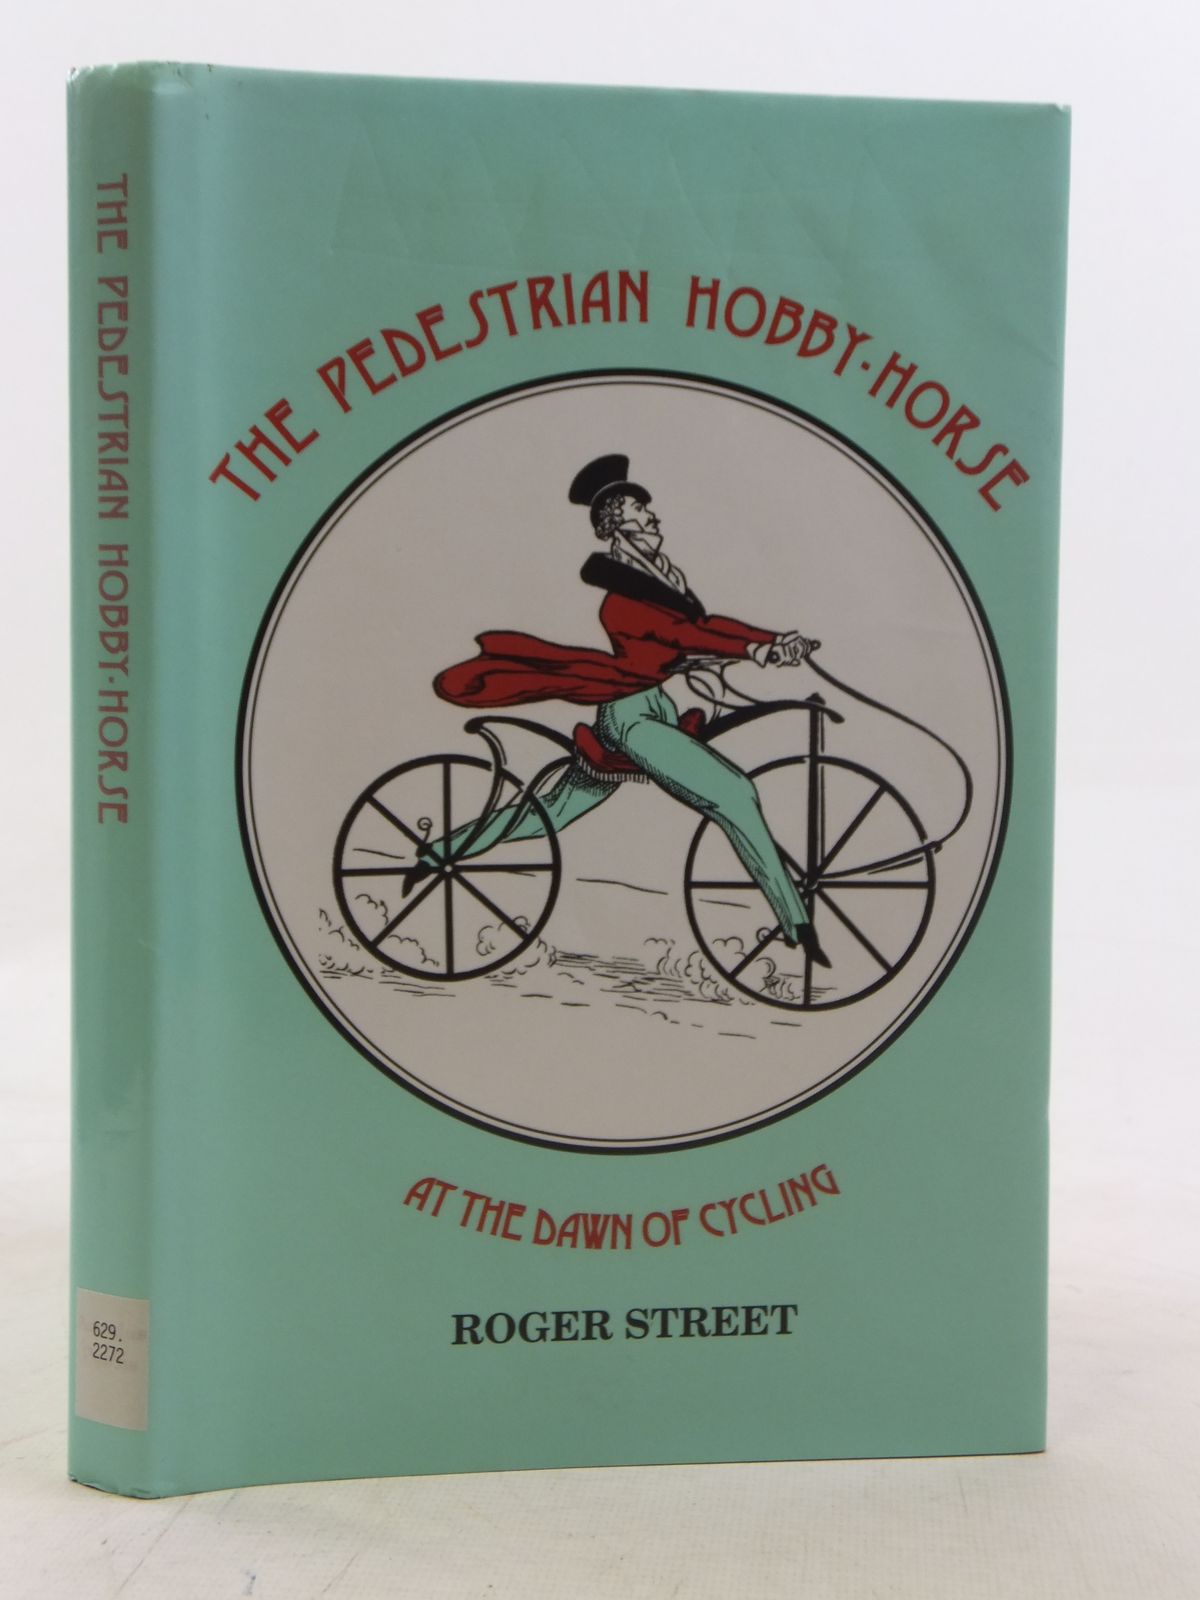 Stella & Rose's Books : THE PEDESTRIAN HOBBY-HORSE AT THE DAWN OF CYCLING  Written By Roger Street, STOCK CODE: 2114932